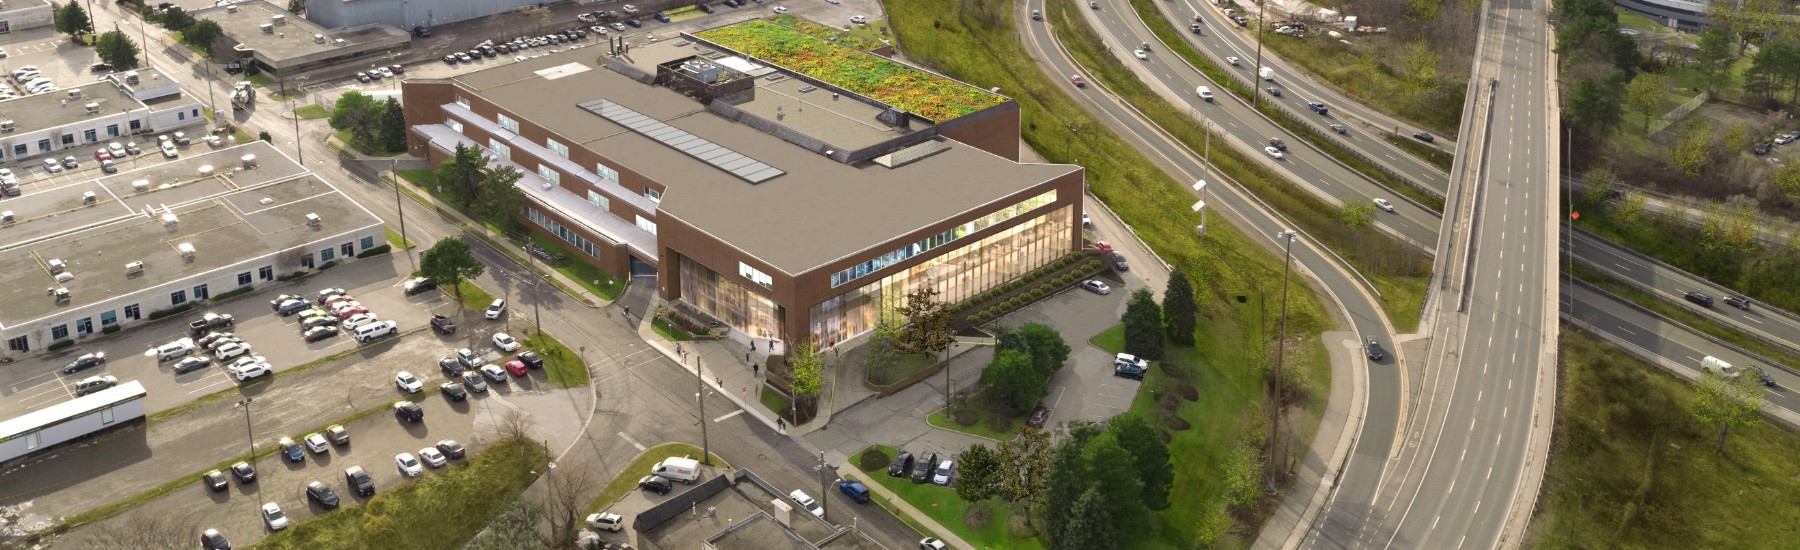 A rendering of an aerial shot of the McMaster Innovation Park, with cars and people in the parking lot on the left side of the building and a large highway on the right side.